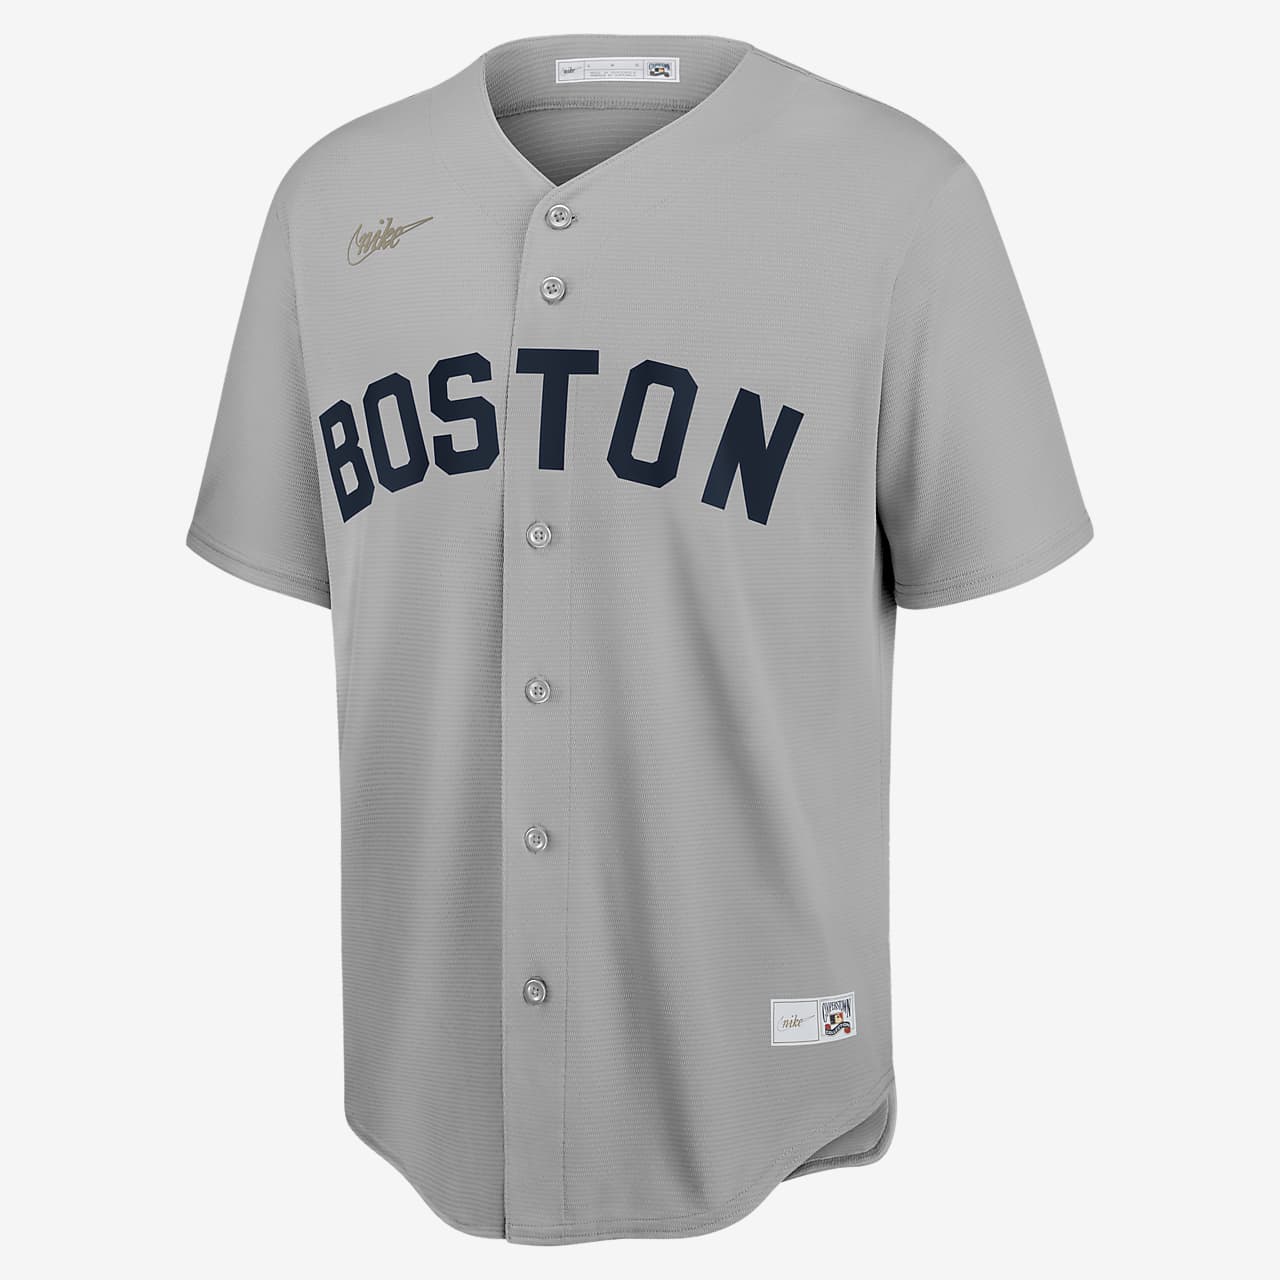 places that sell baseball jerseys